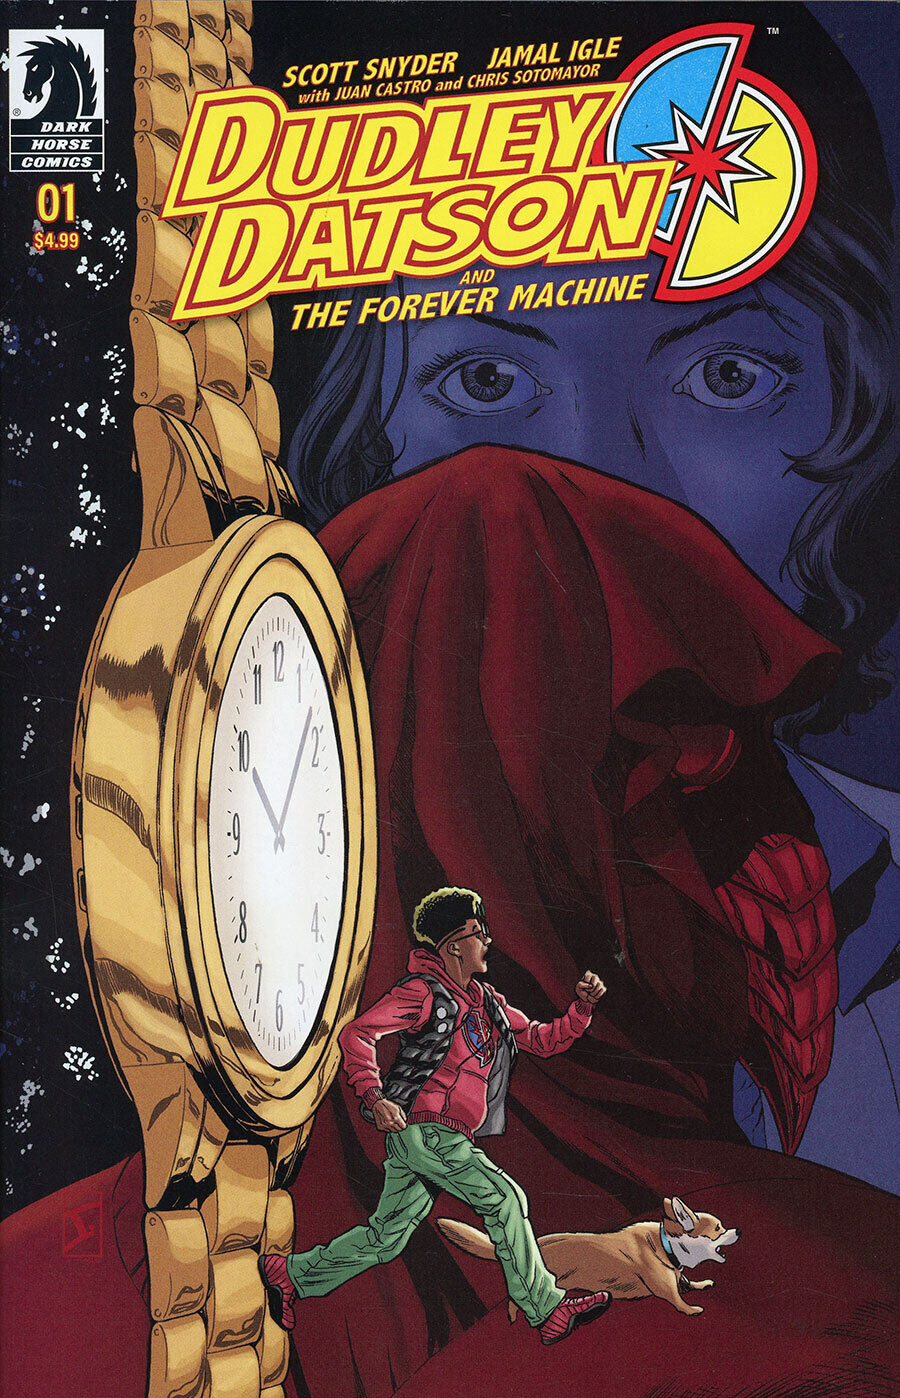 DUDLEY DATSON AND THE FOREVER MACHINE SERIES LISTING (#1-3 AVAILABLE/YOU PICK)